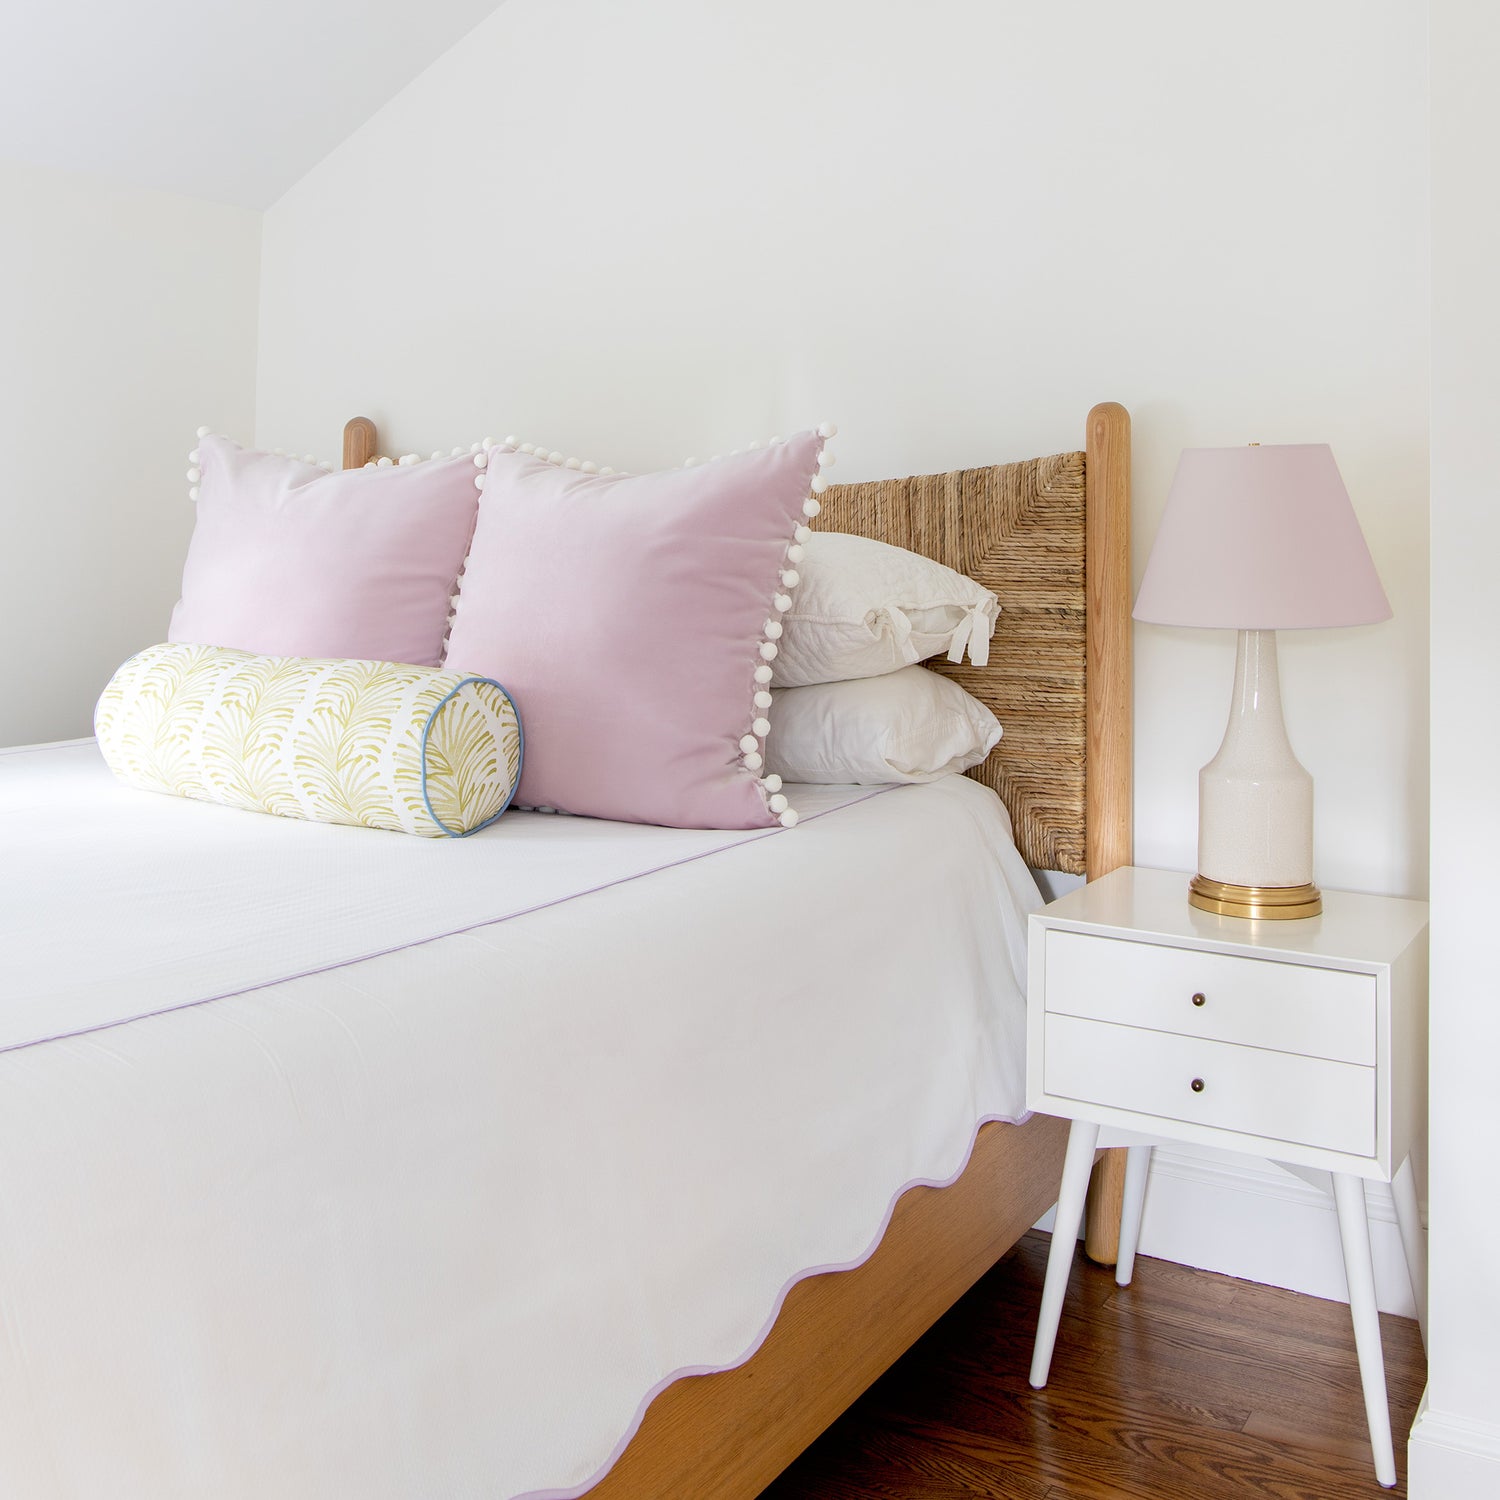 Bedroom styled with two Lilac velvet pillows with white pom poms and Yellow Stripe Chartreuse printed bolster with blue piping on white bed next to white night stand with white, gold, and pink lamp